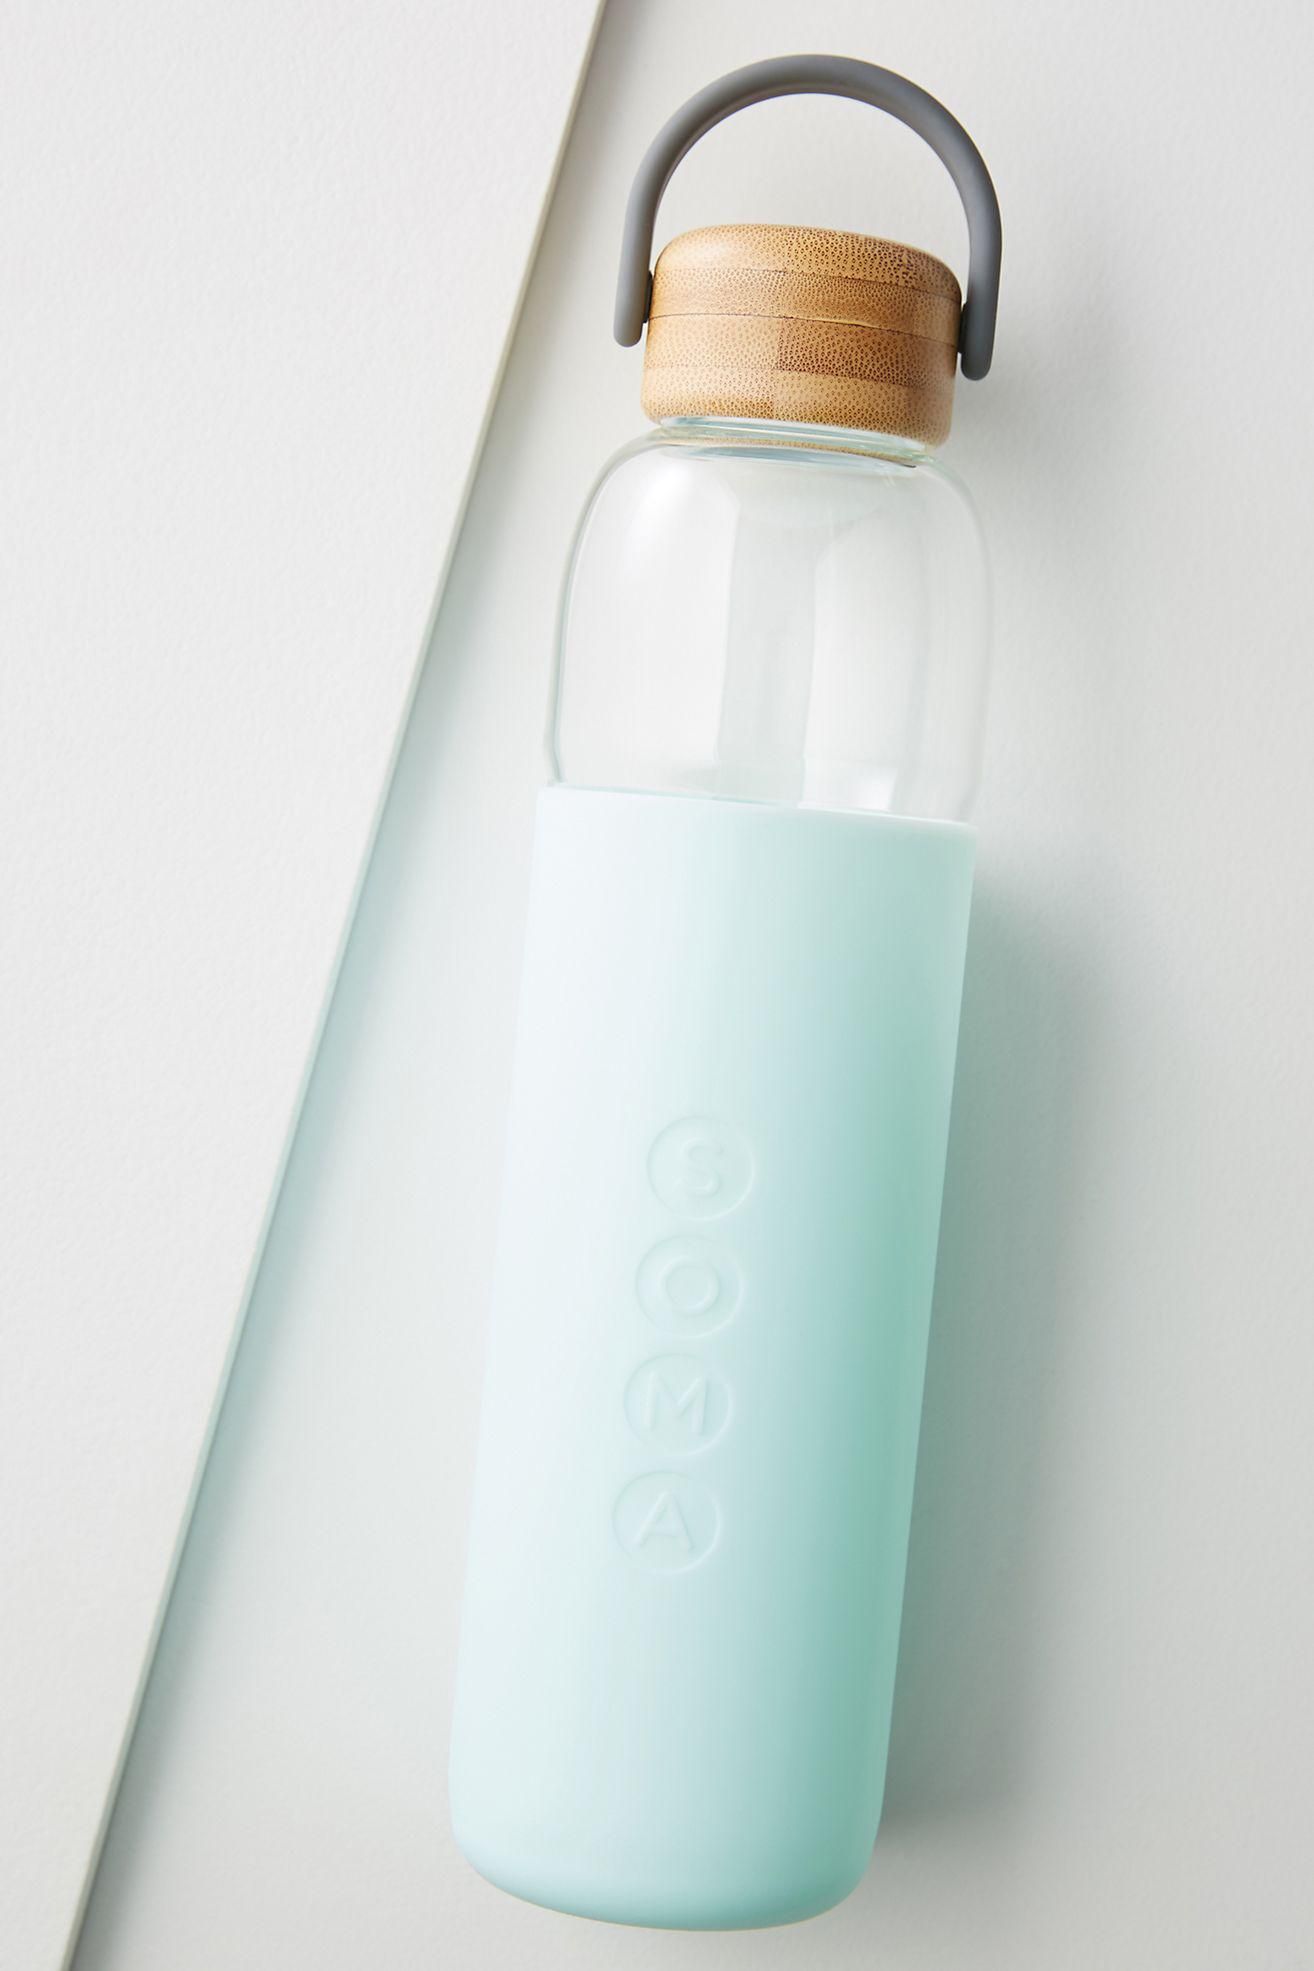 The Best Water Bottles To Keep You Hydrated In 2021